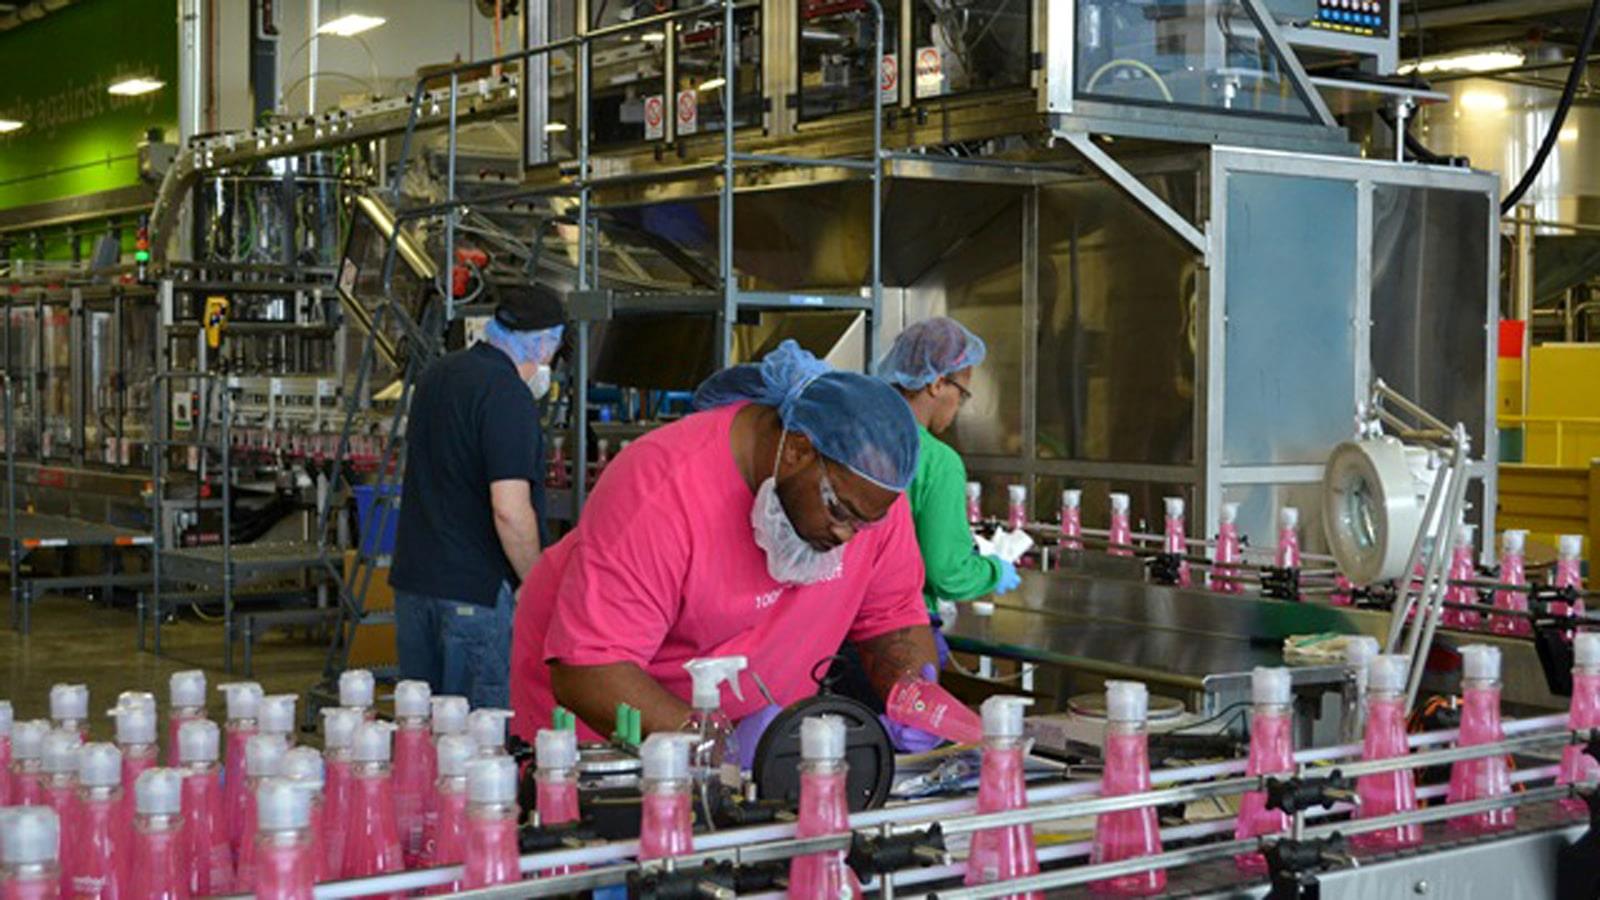 Women with hairnet at assembly line with pink bottles